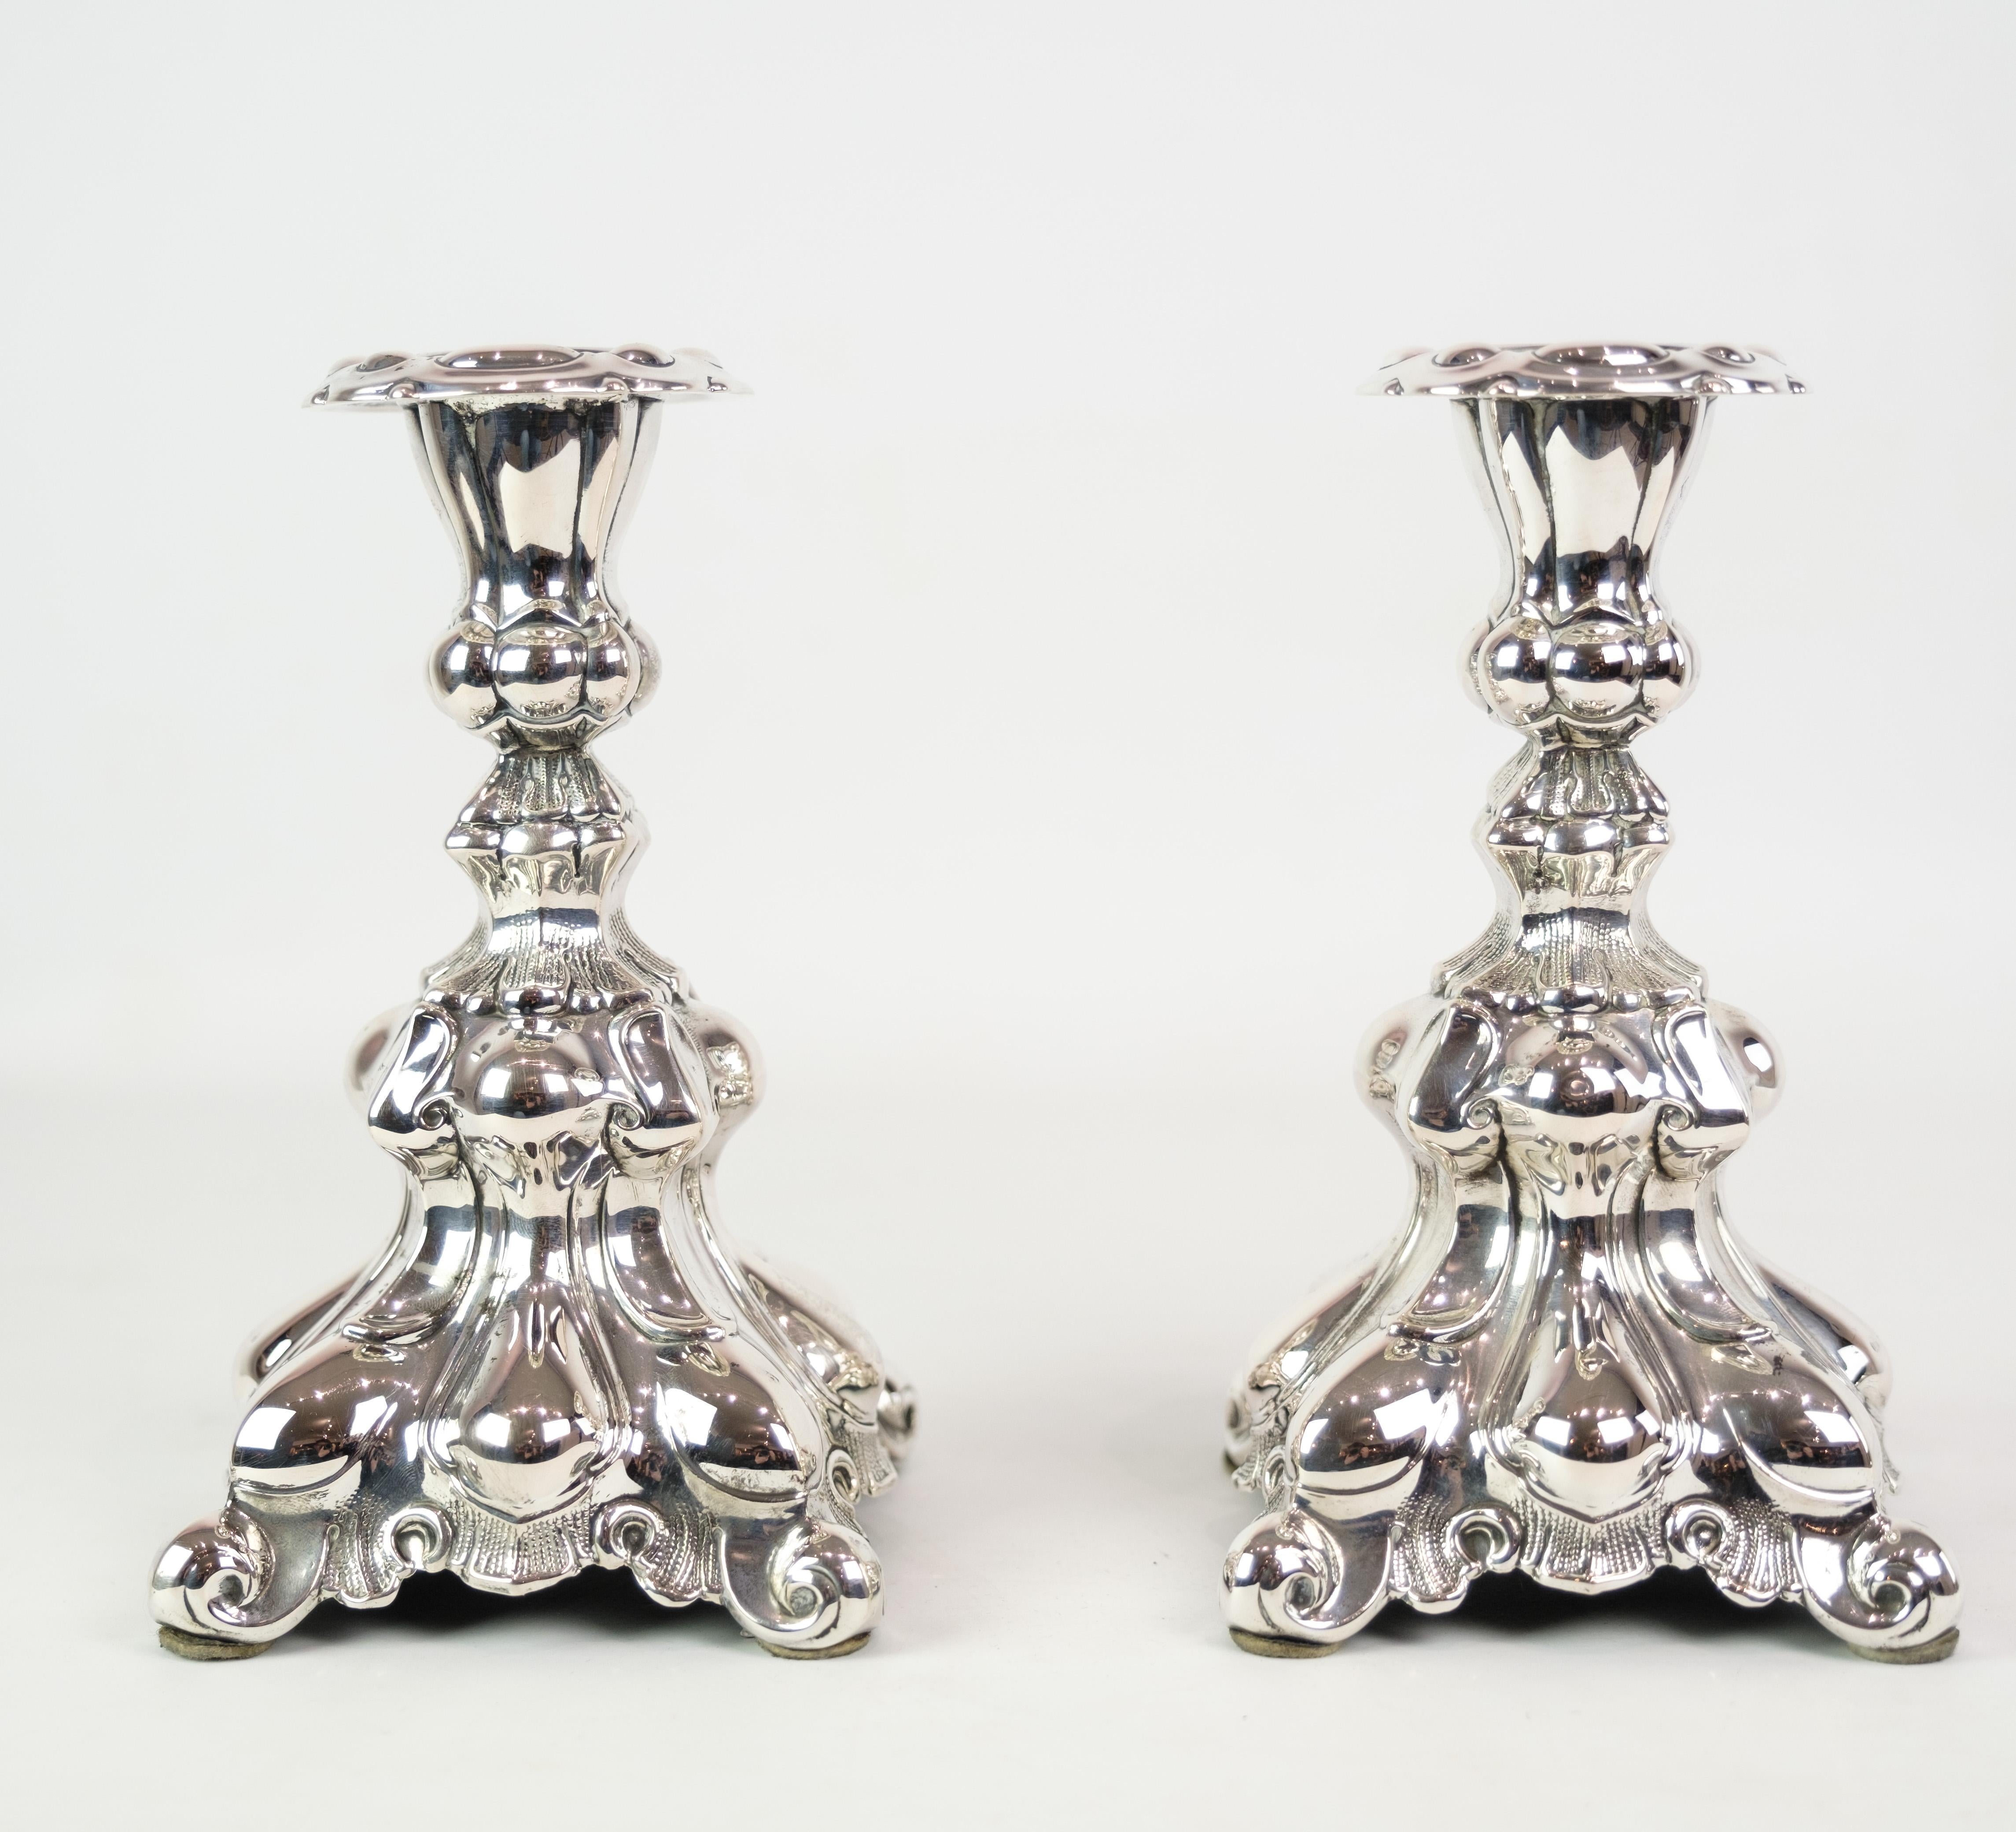 A pair of real silver candlesticks crafted in the Rococo style, dating back to the 1930s. These candlesticks exude the opulence and intricate detailing characteristic of the Rococo era, adding a touch of grandeur to any setting. With their ornate